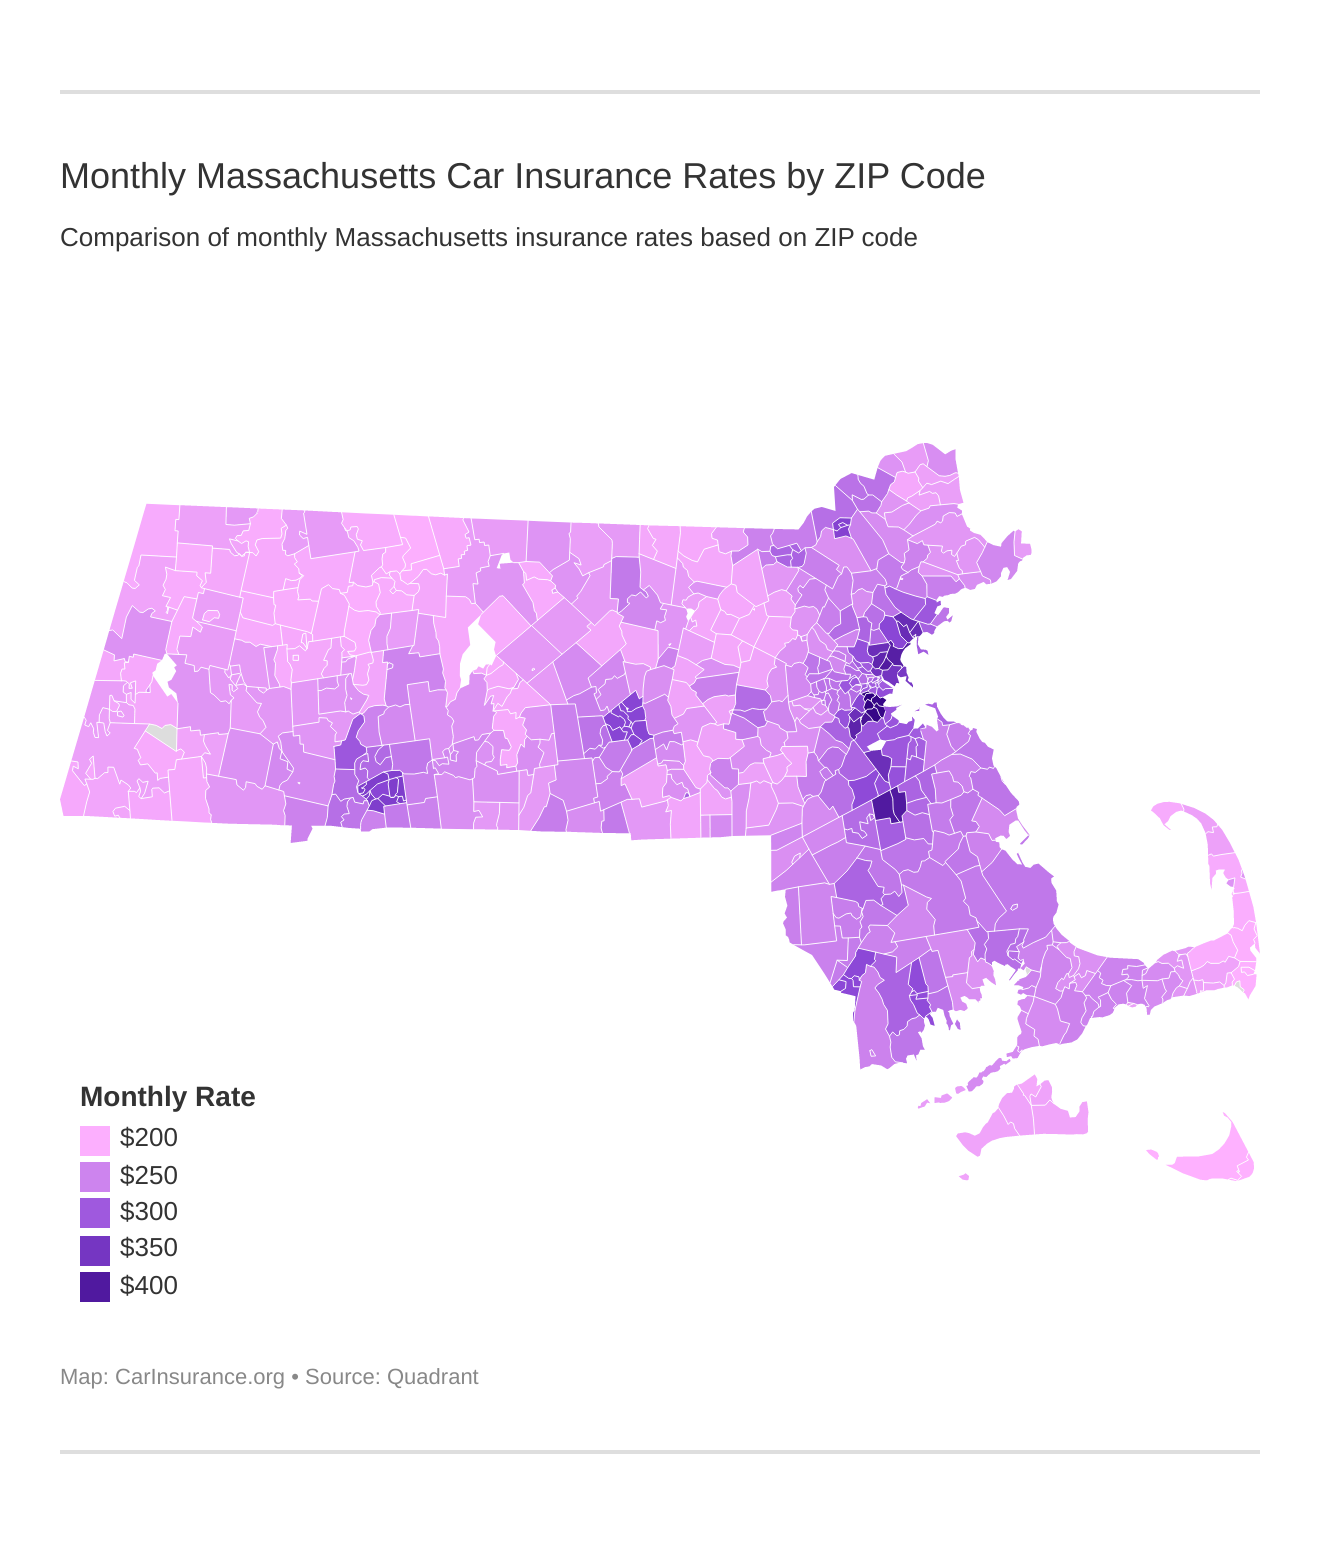 Monthly Massachusetts Car Insurance Rates by ZIP Code